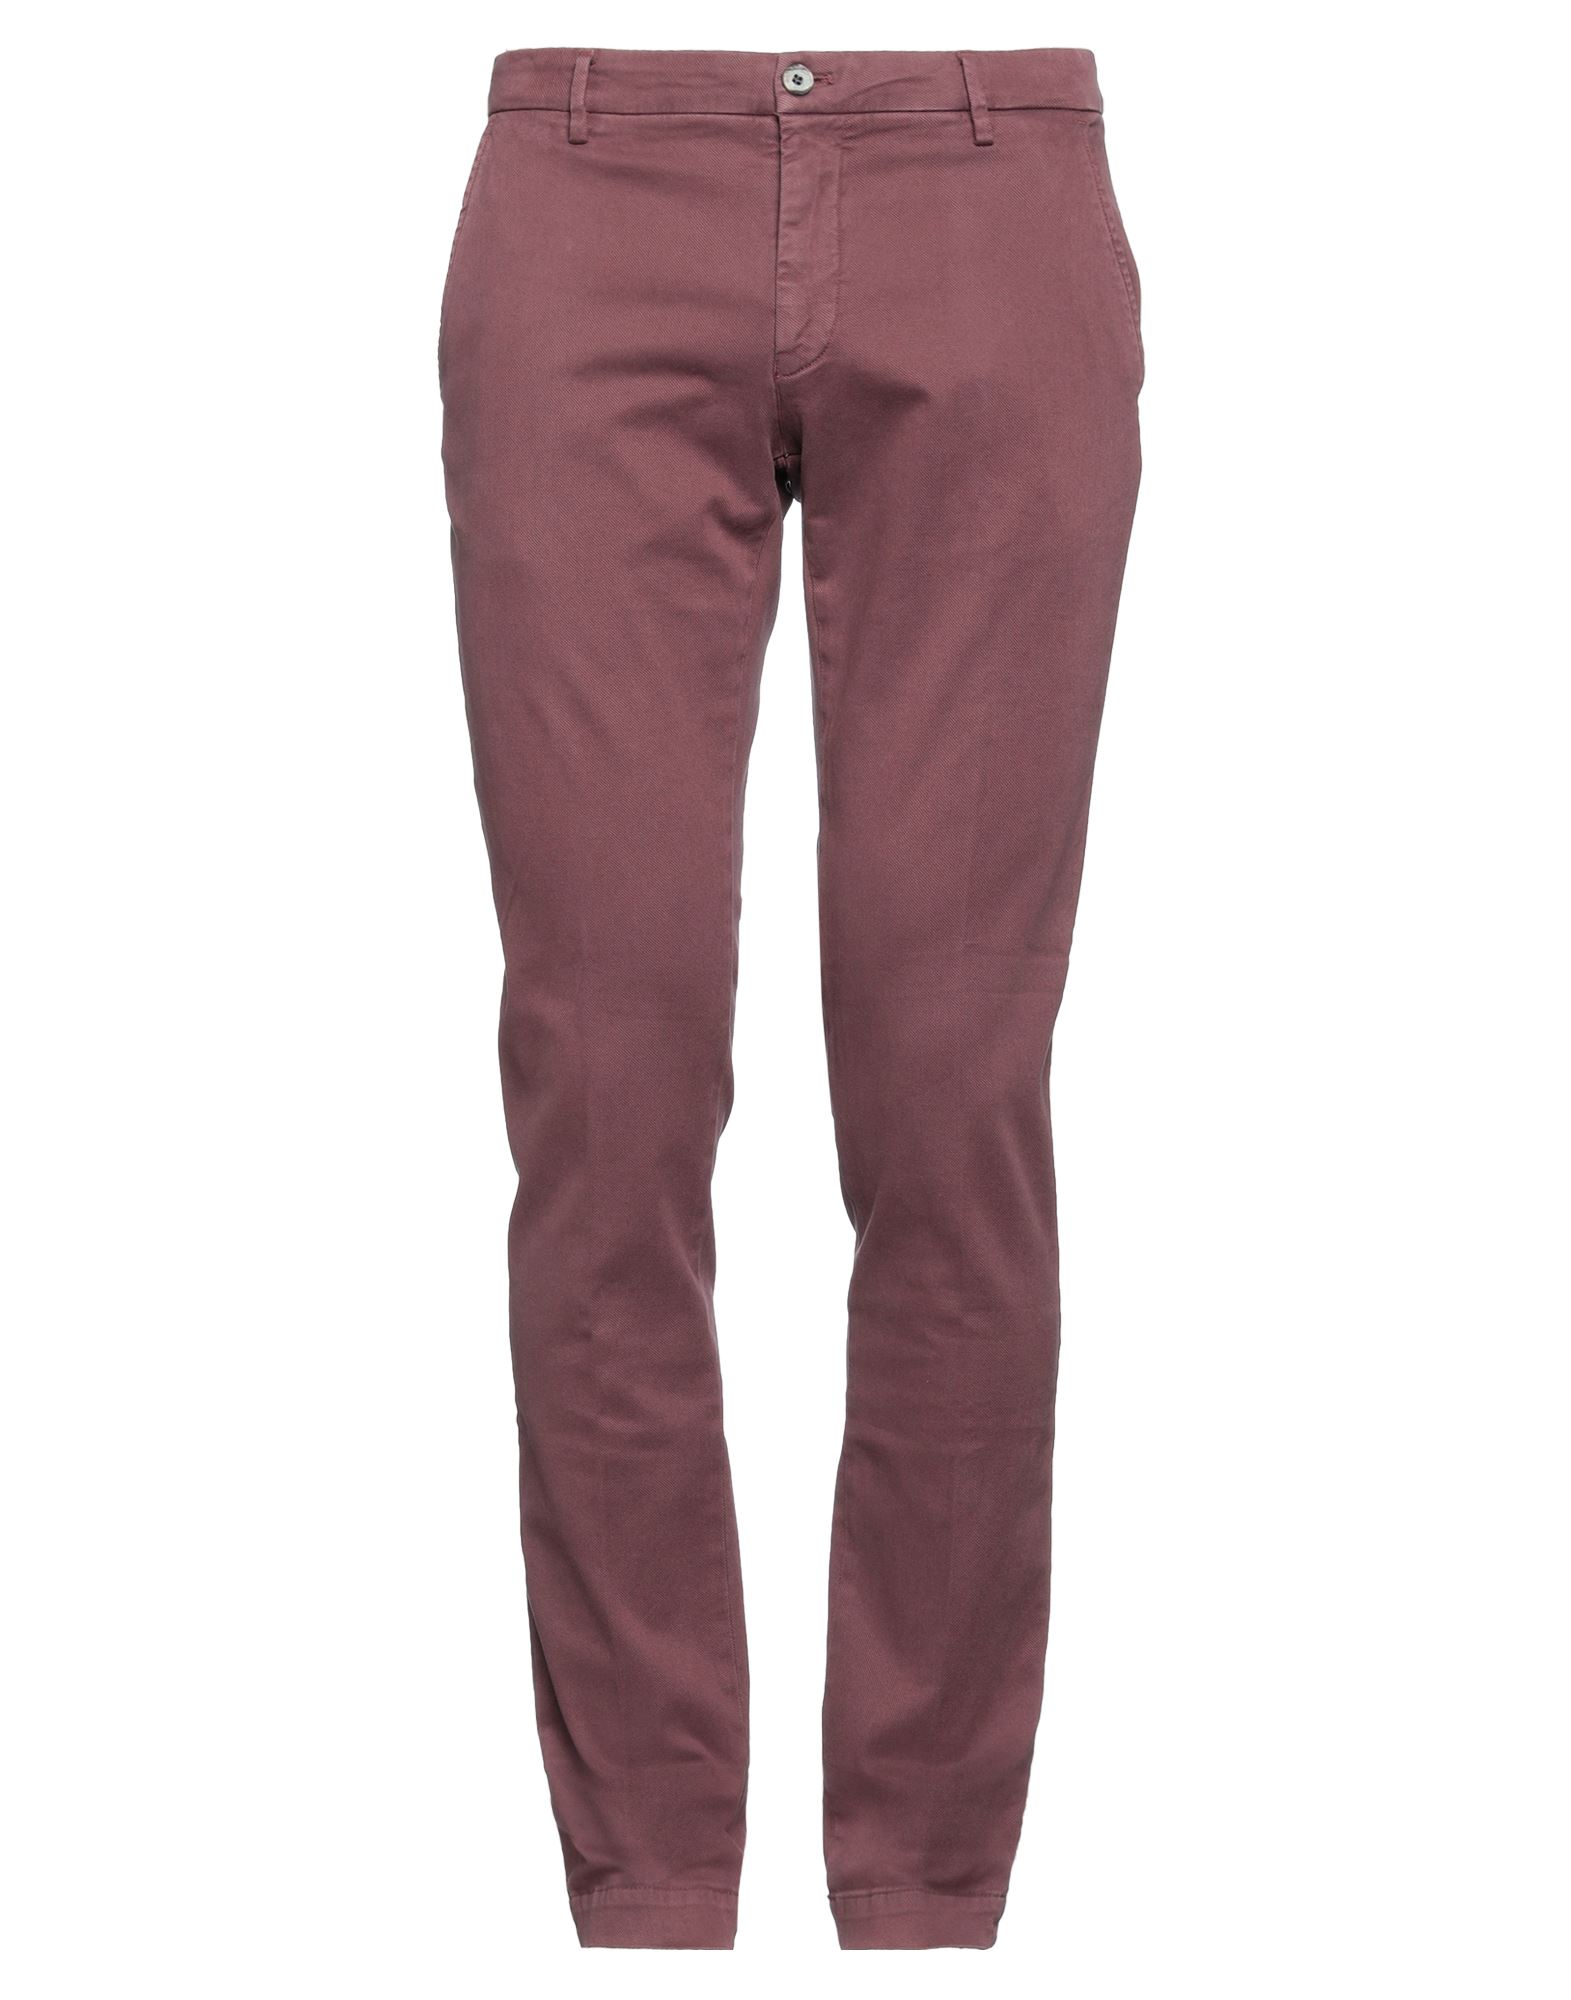 Em's Of Mason's Pants In Pastel Pink